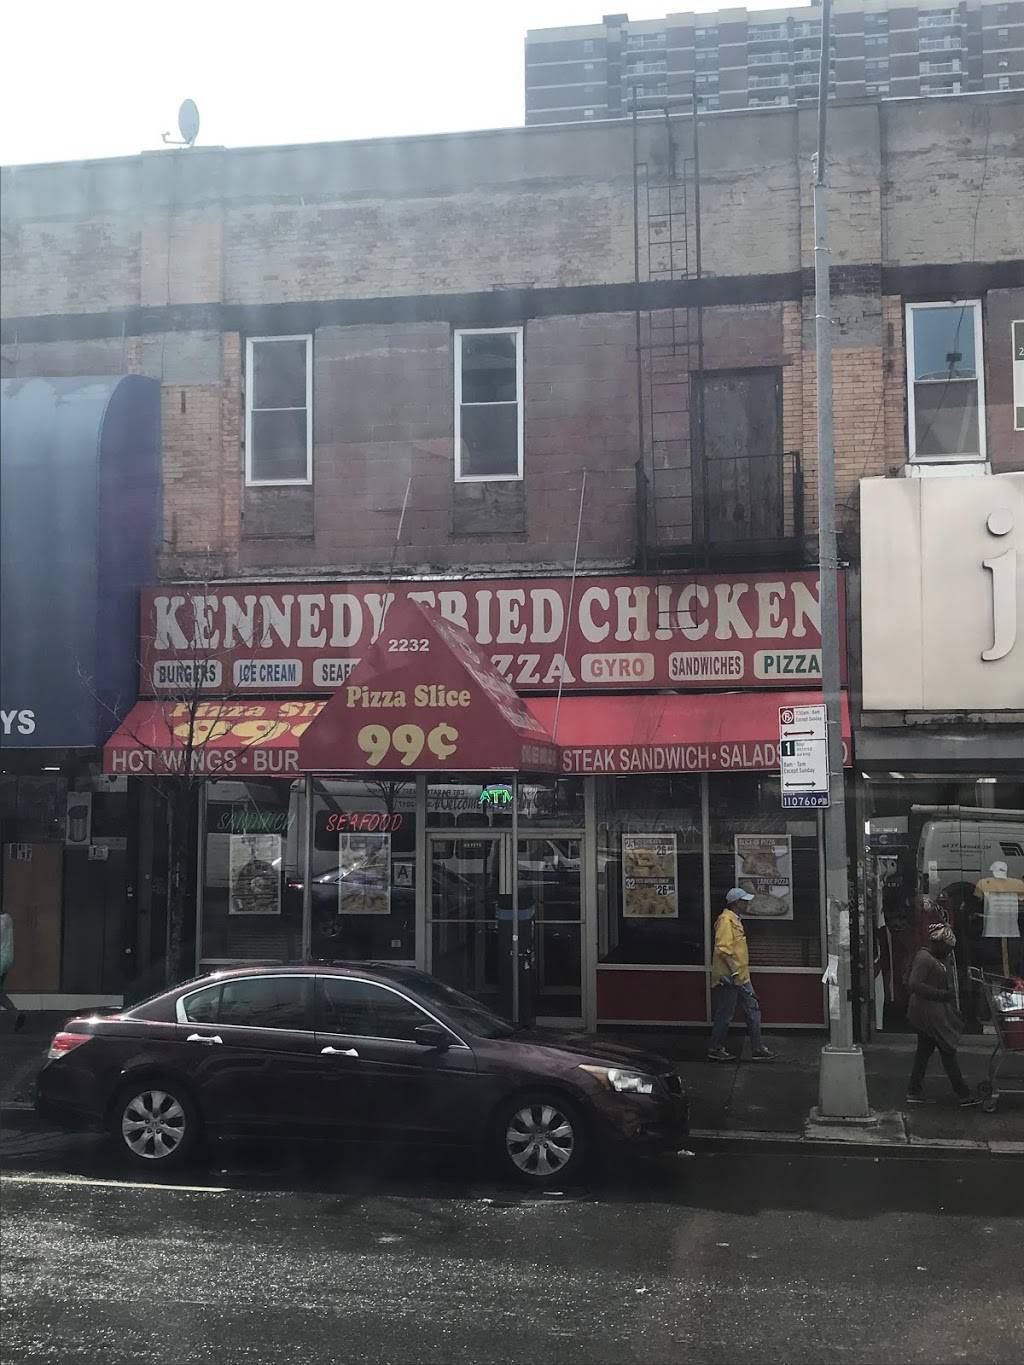 Kennedy Fried Chicken | restaurant | 2232 3rd Ave, New York, NY 10035, USA | 2127225420 OR +1 212-722-5420